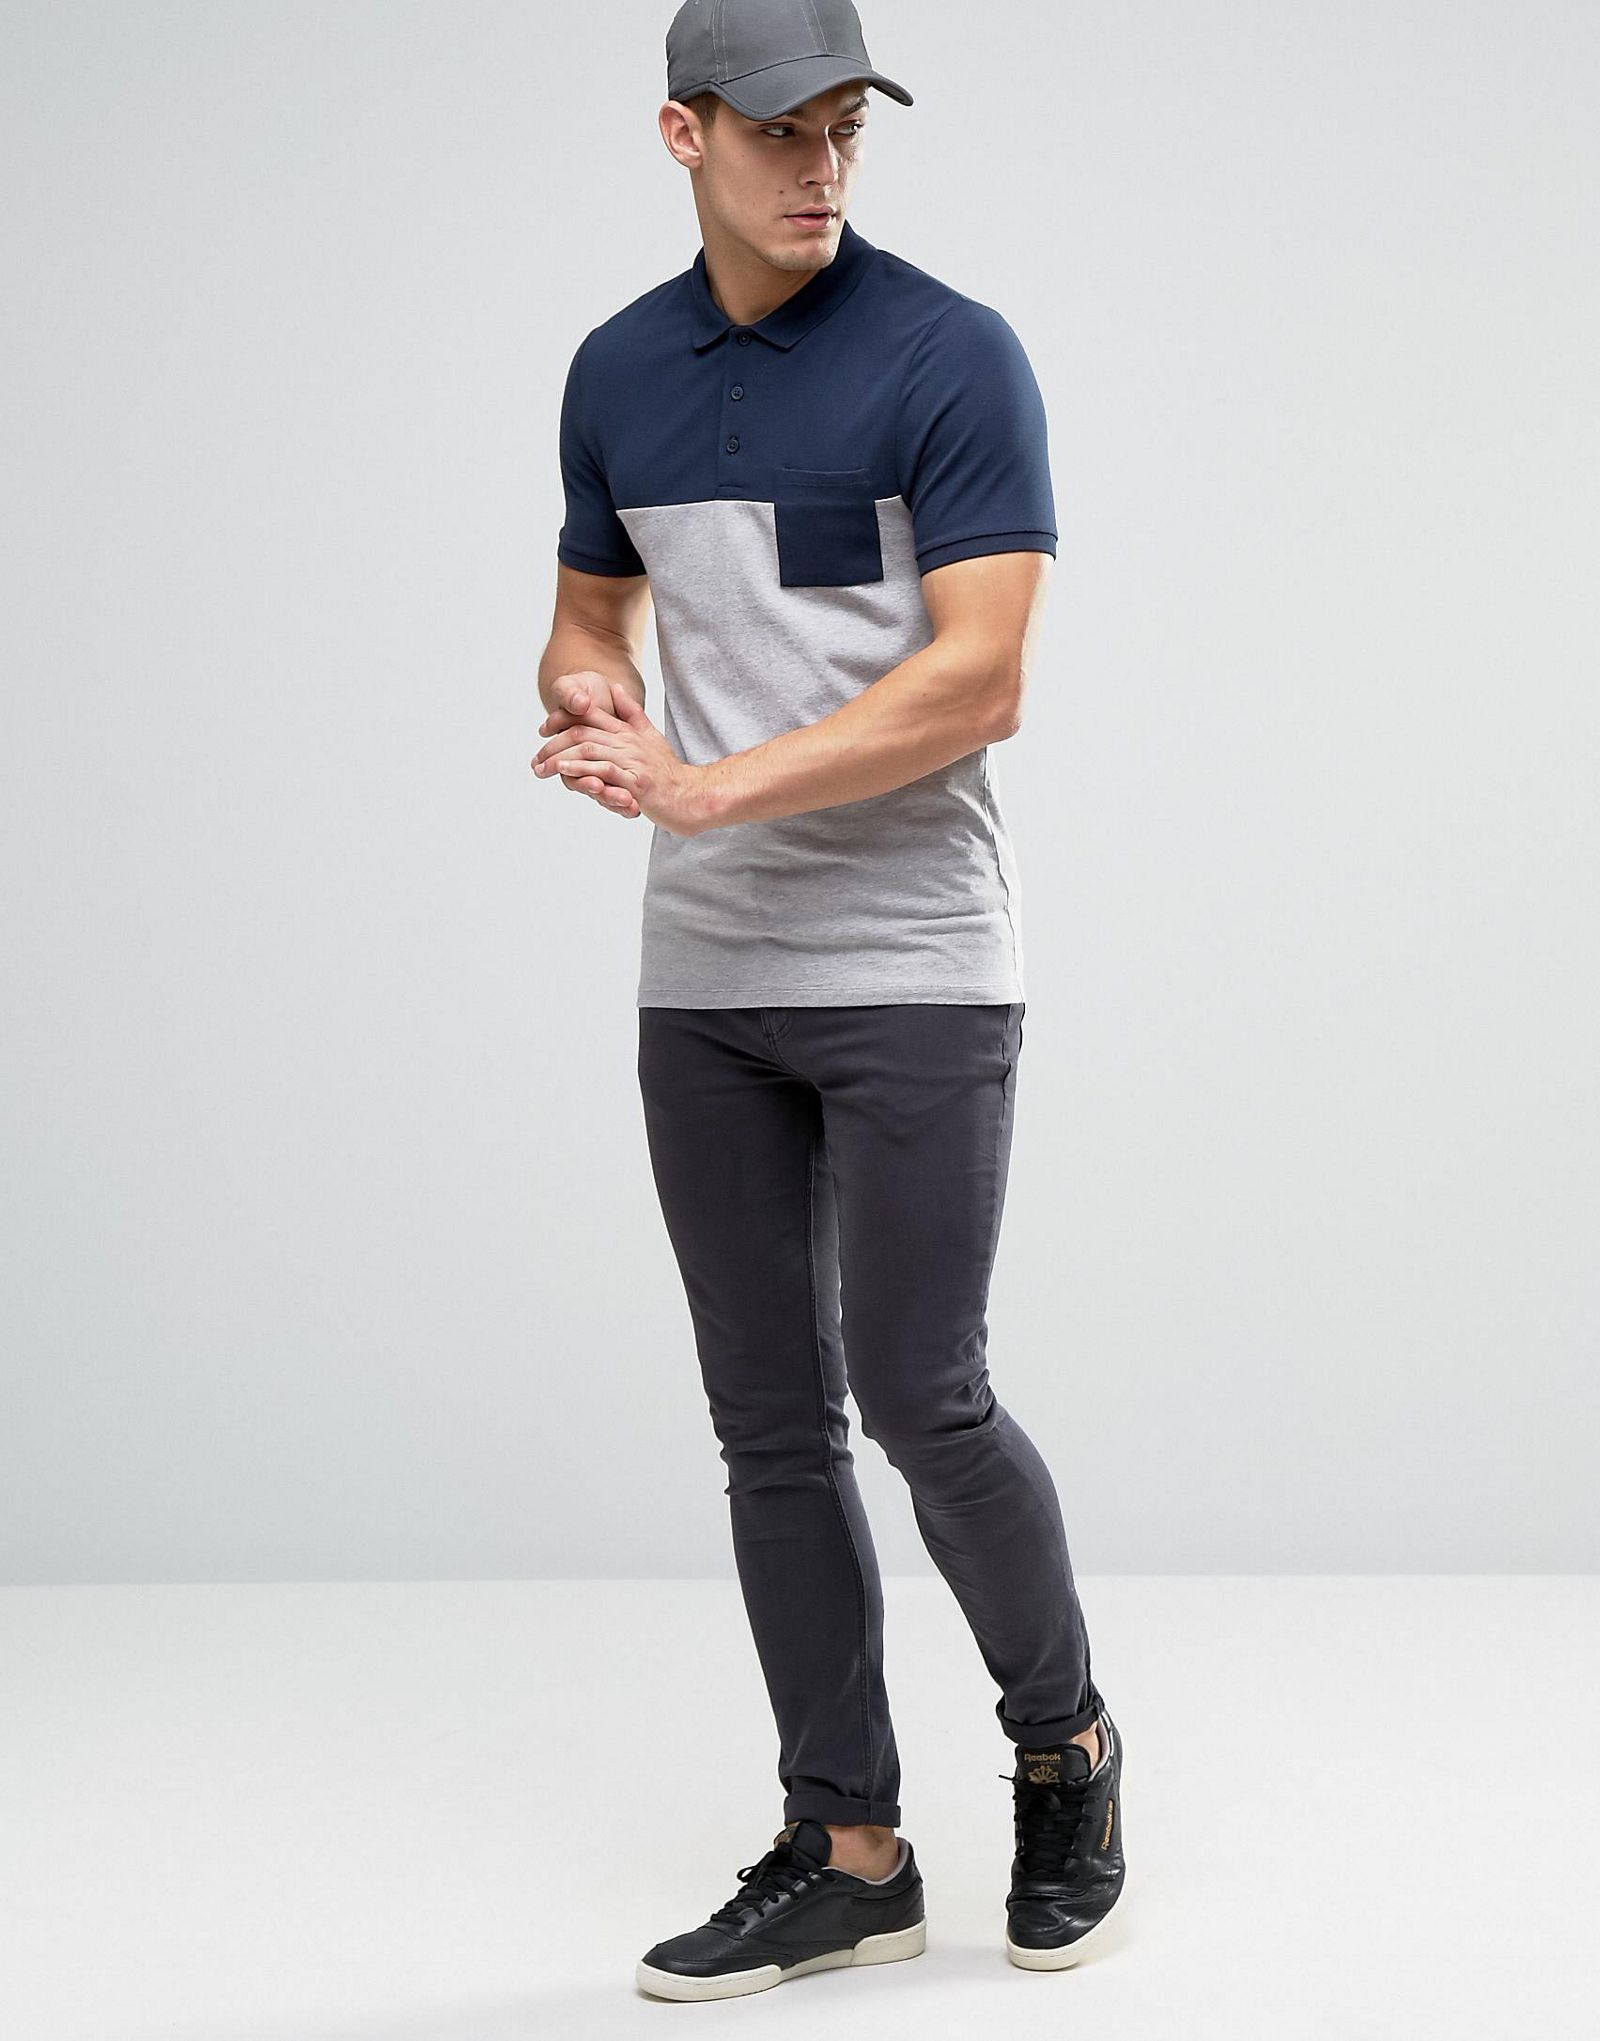 ASOS Half & Half Muscle Polo With Pocket In Navy and Grey Marl